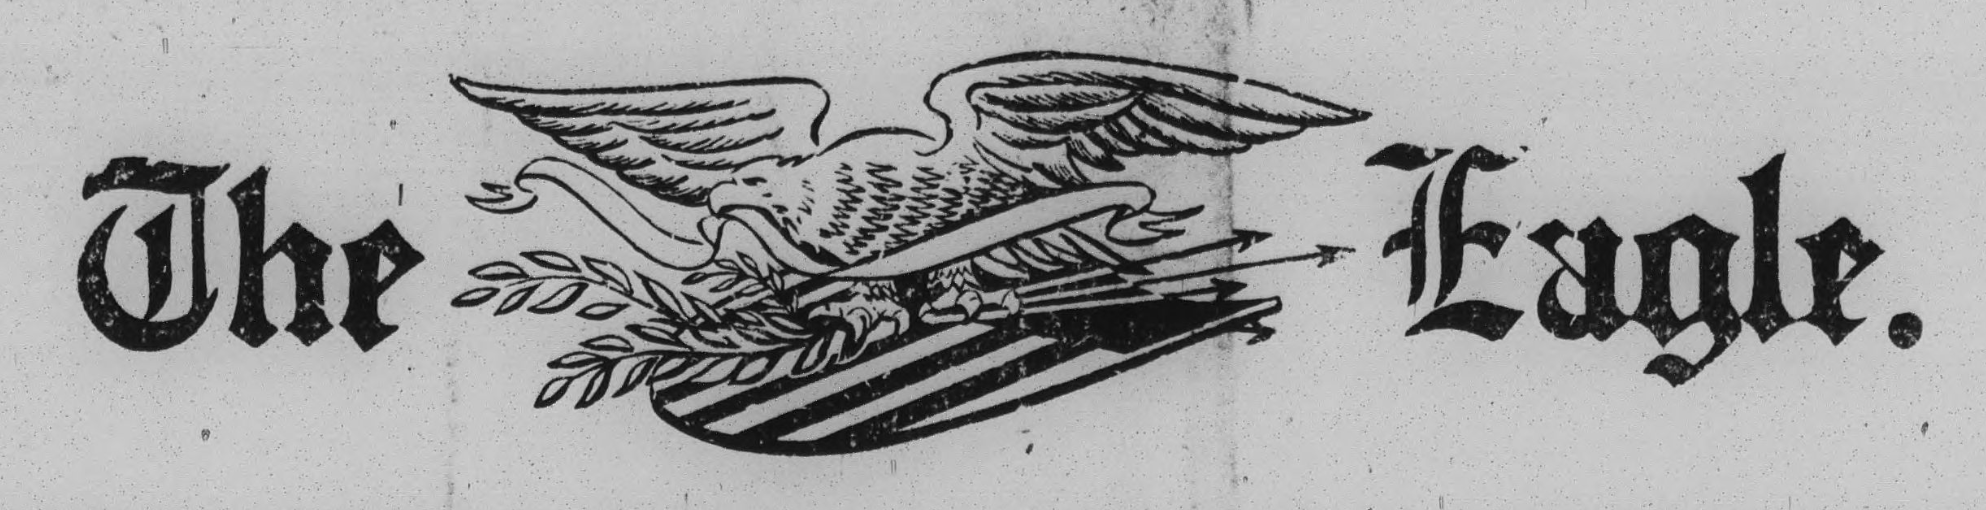 Header for The Eagle newspaper from 1956. Between the words "the" and "eagle" there is an eagle with a ribbon in its beak, a plant in one talon, arrows in the other. The eagle is flying over what looks like the United States flag.